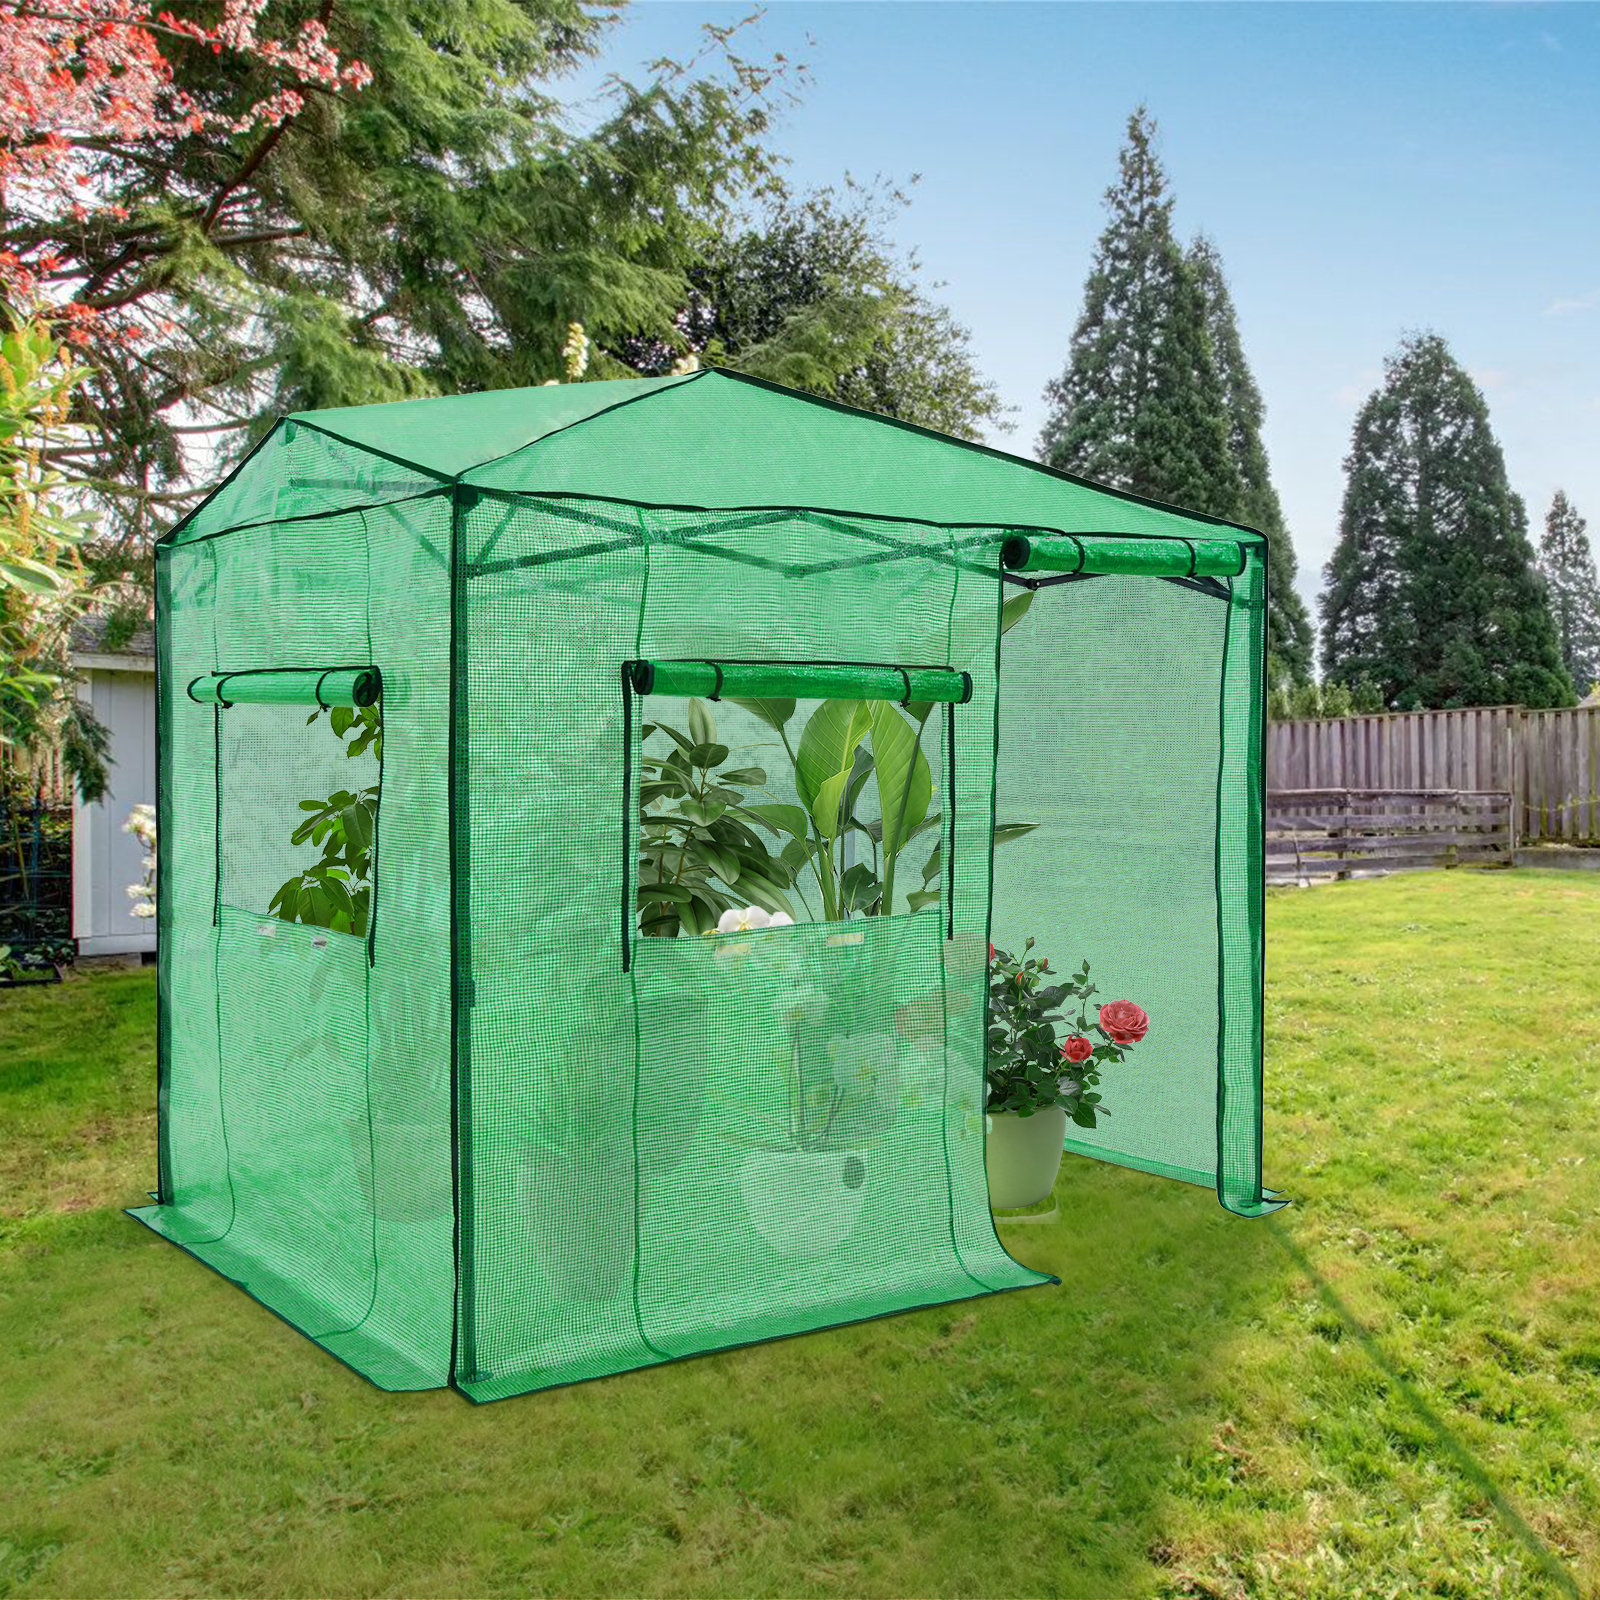 EAGLE PEAK Pop Up Greenhouses 8' X 6' Portable Instant Walk-In Garden  Greenhouse & Reviews